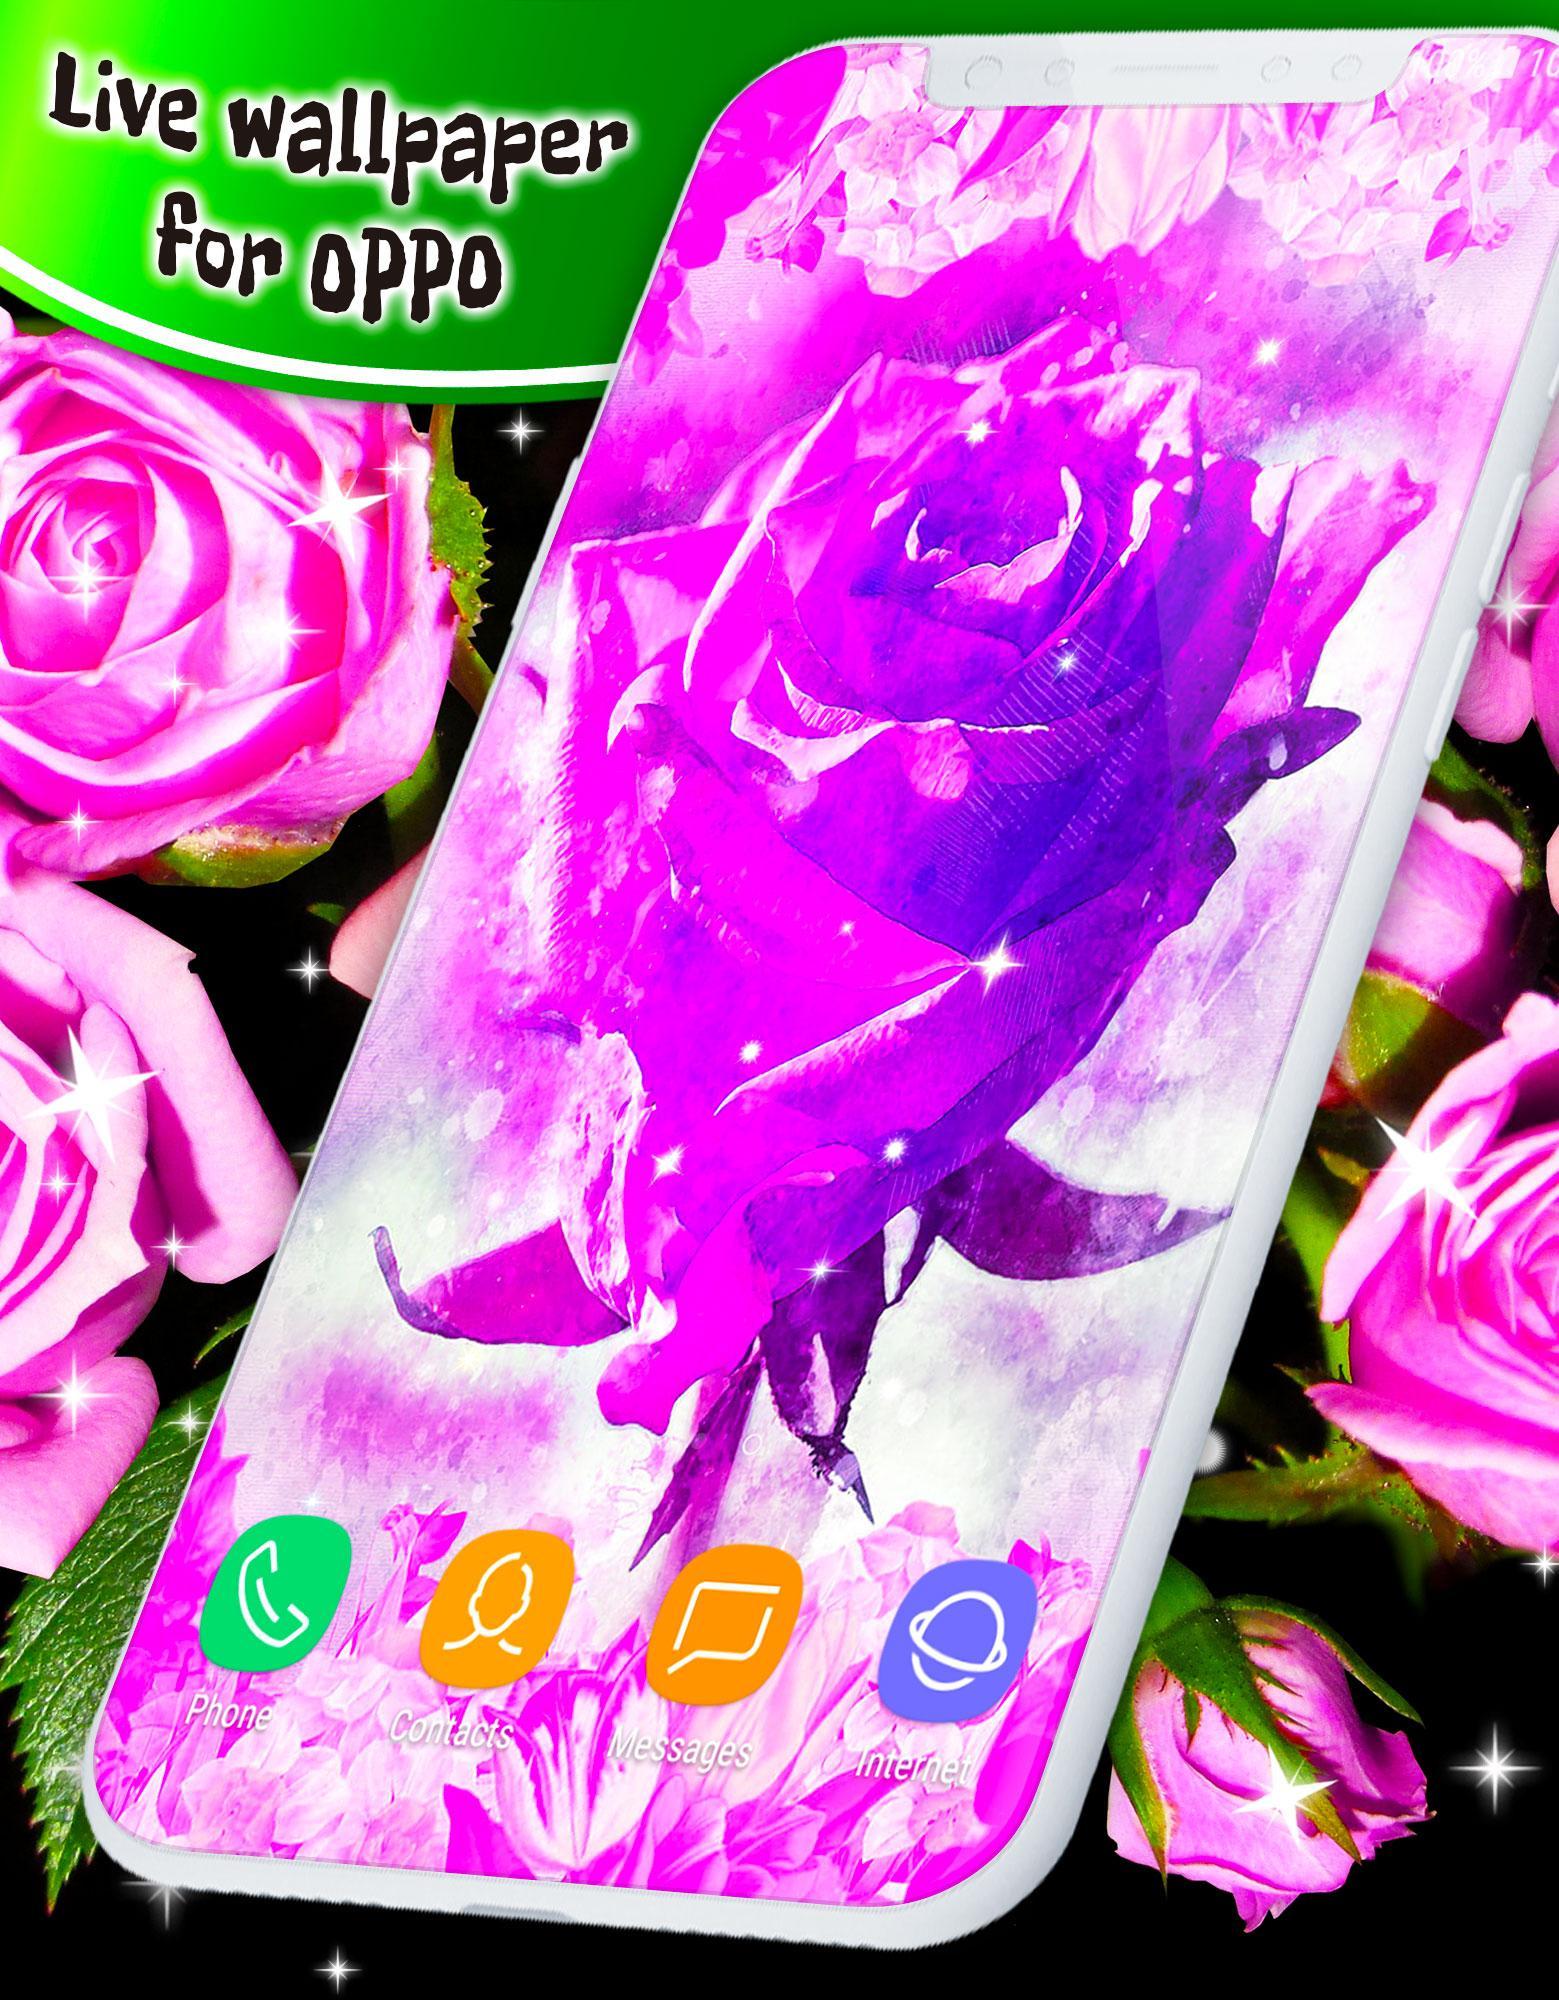 HD Live Wallpaper for OPPO ⭐ 4K Wallpapers Themes 6.7.2 Screenshot 6